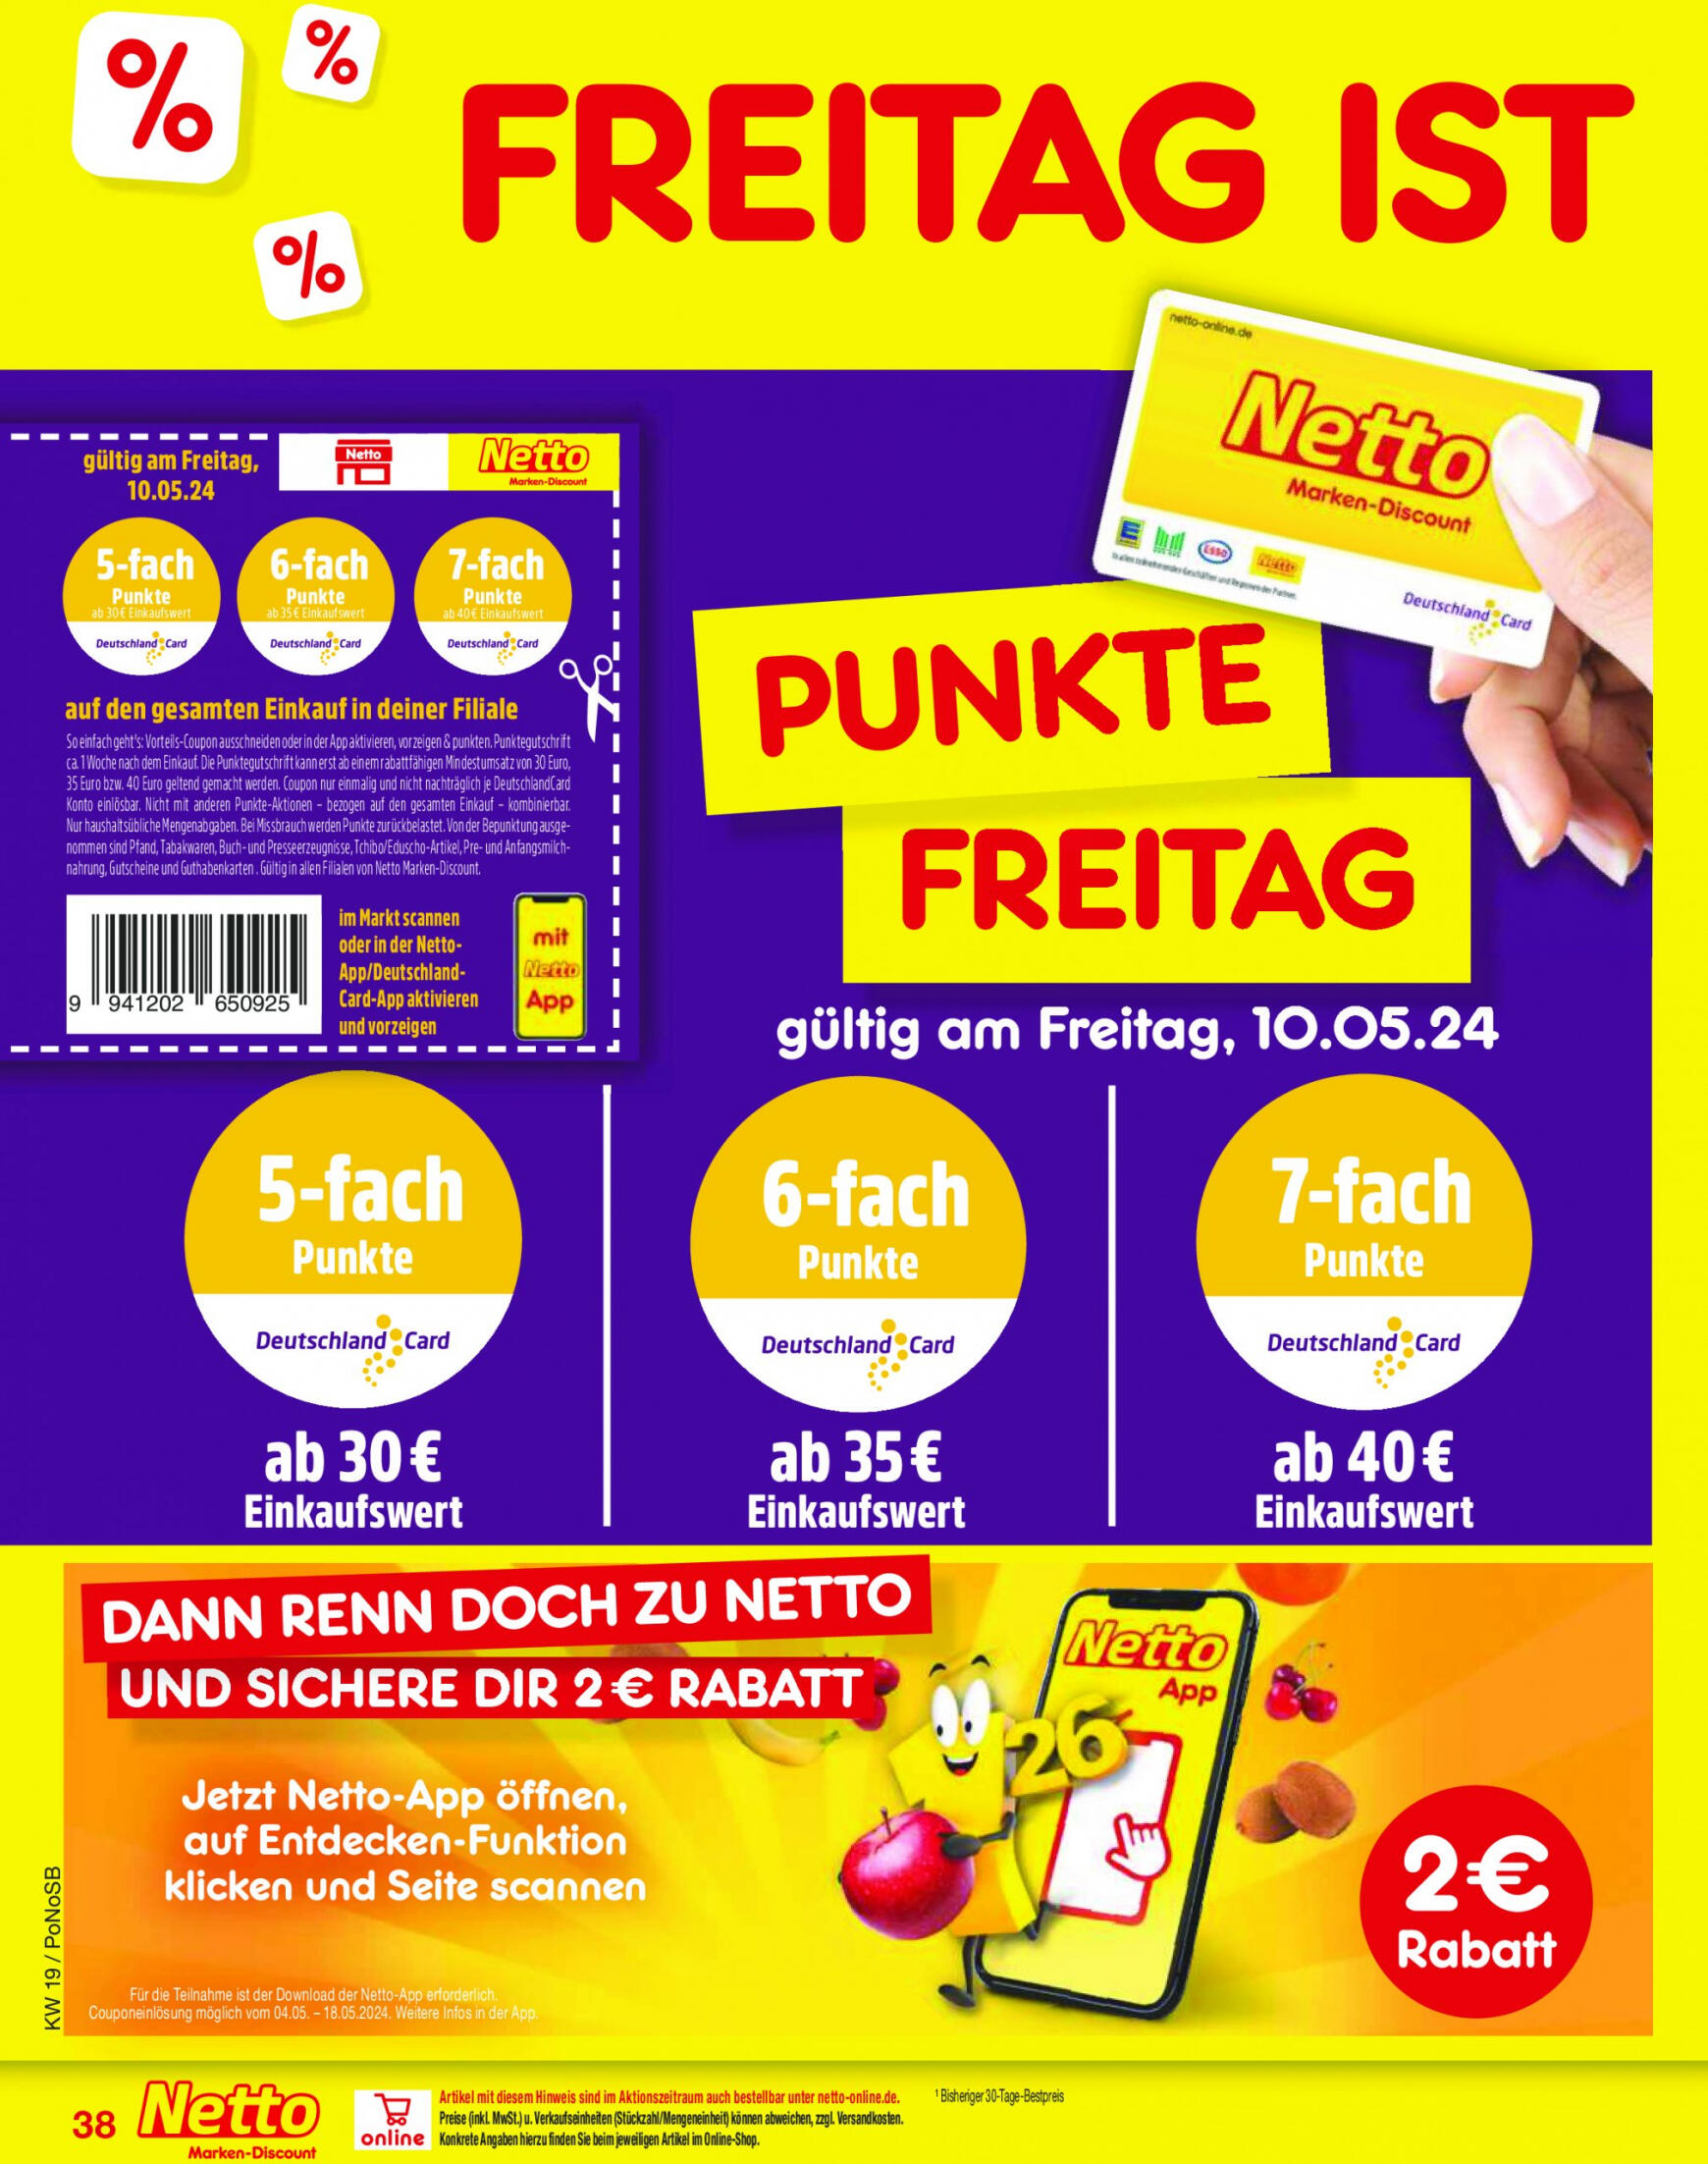 netto - Flyer Netto aktuell 06.05. - 11.05. - page: 48